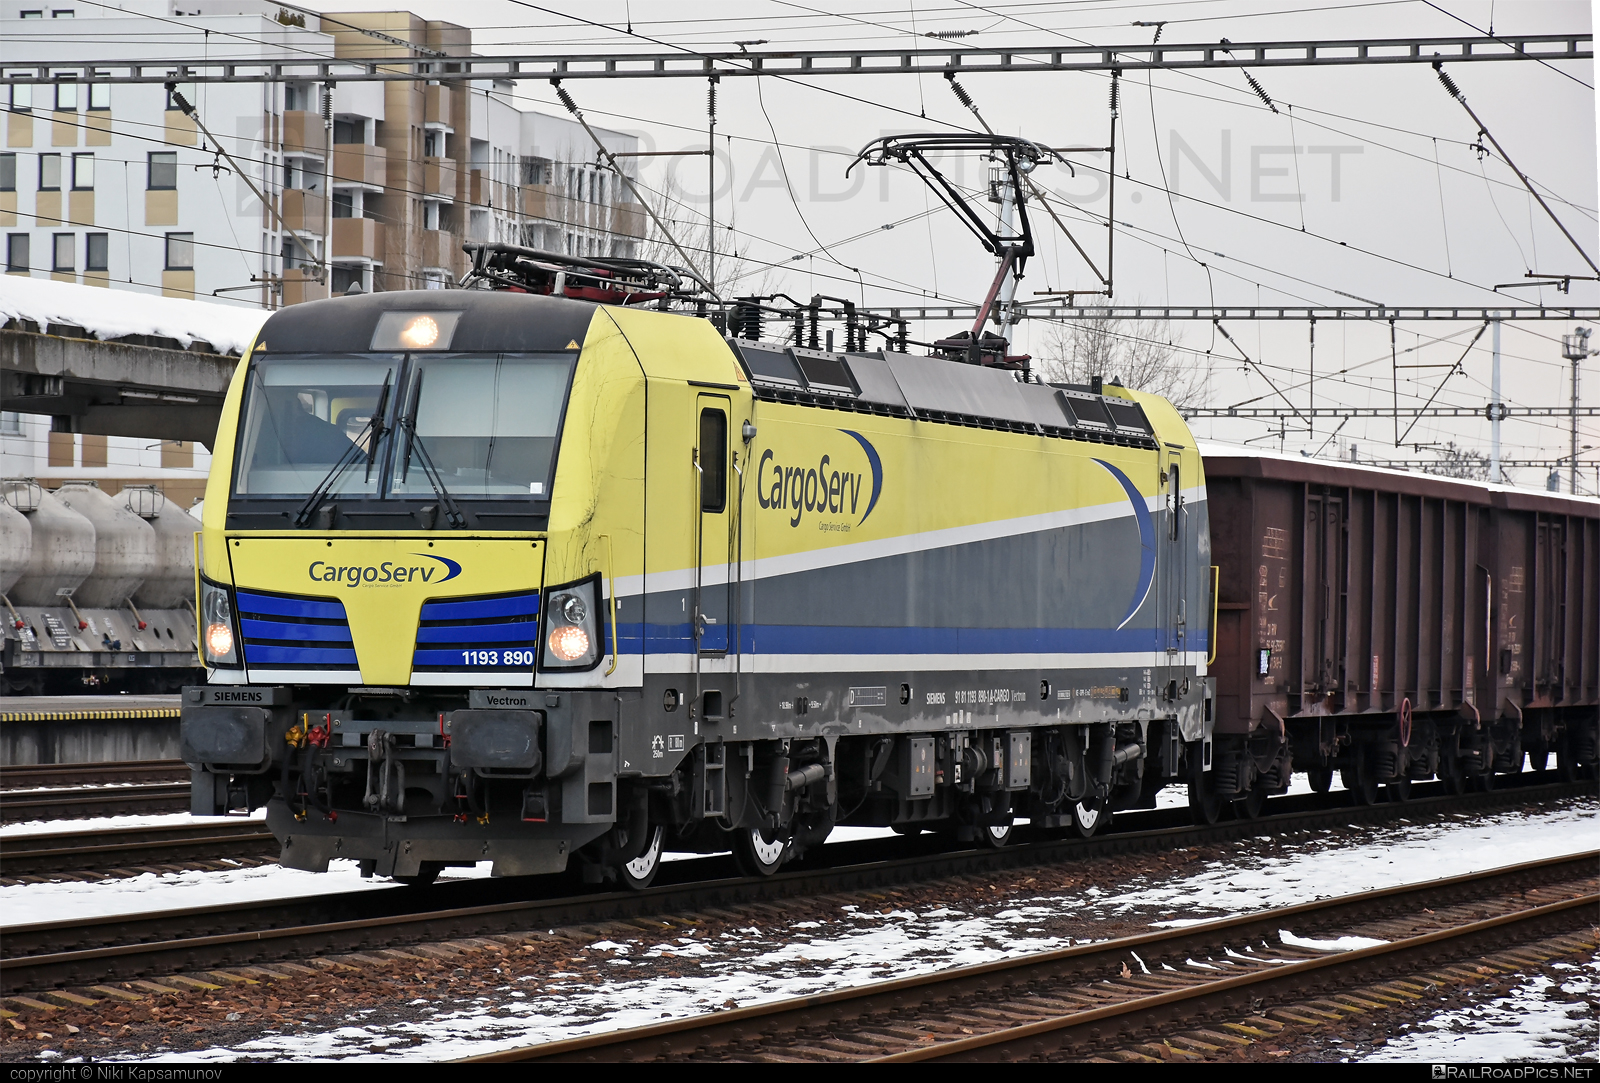 Siemens Vectron AC - 1193 890 operated by CargoServ GmbH #cargoserv #openwagon #siemens #siemensVectron #siemensVectronAC #vectron #vectronAC